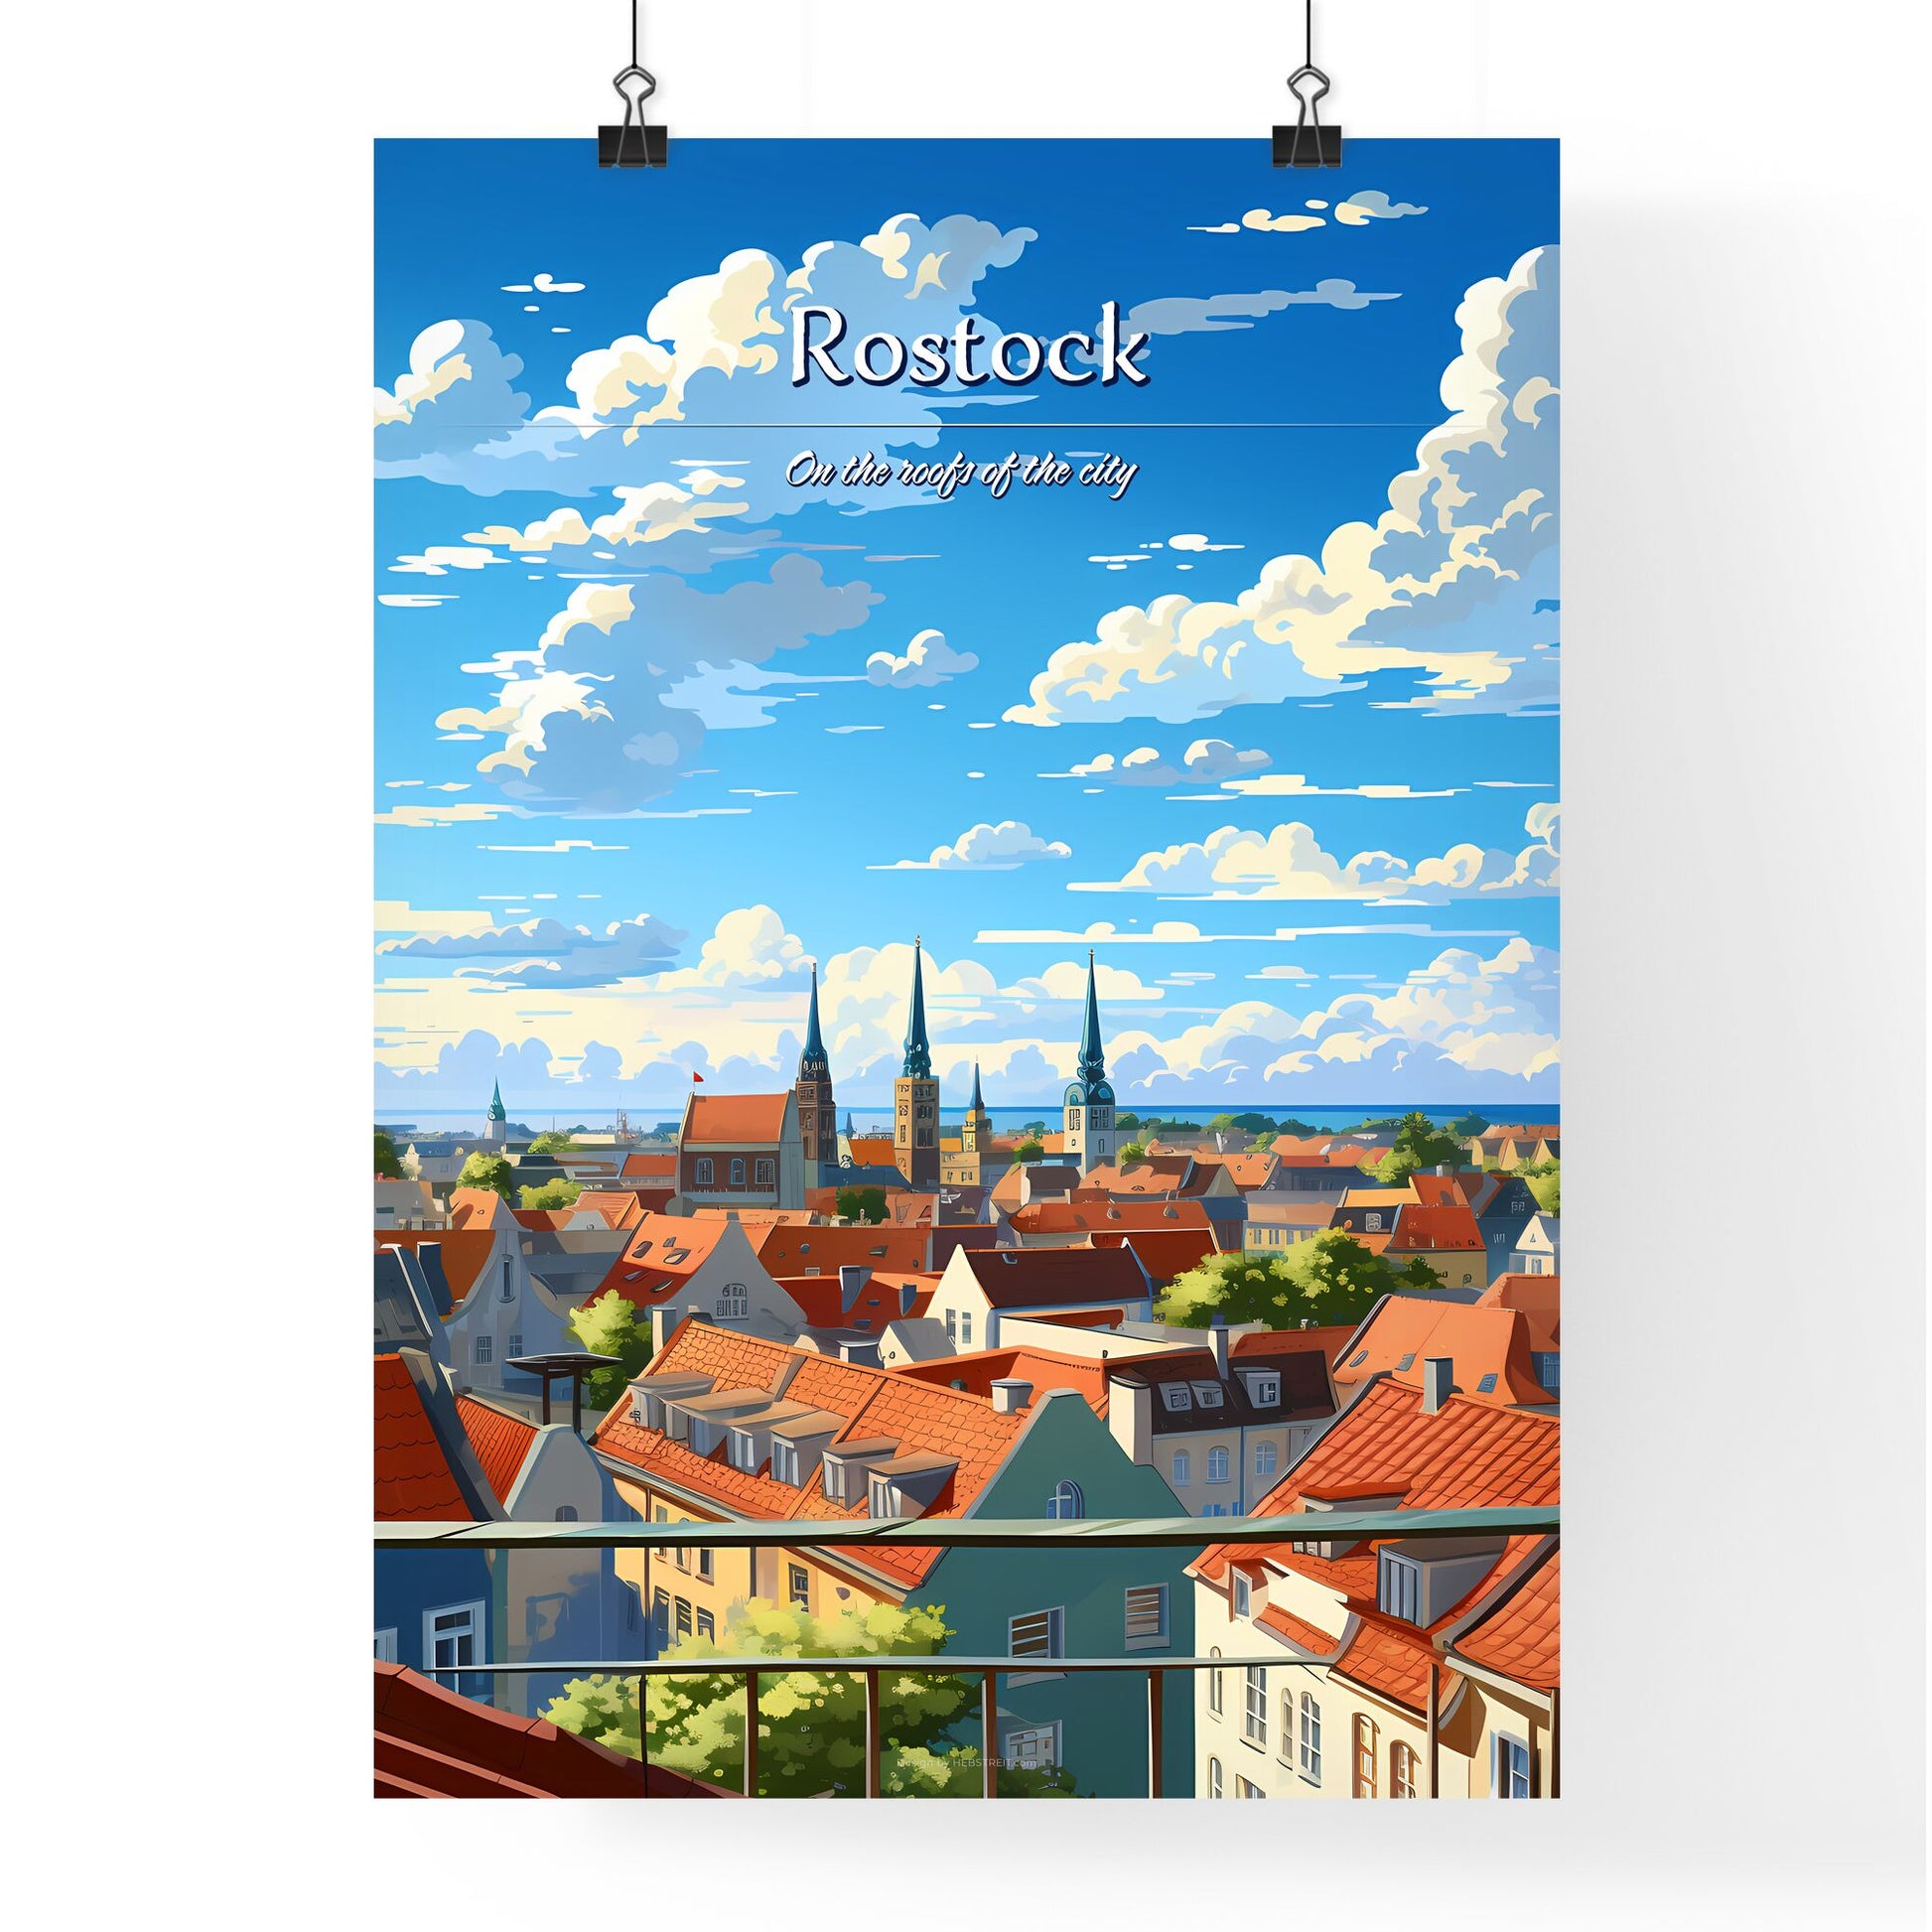 On the roofs of Rostock - Art print of a city with red roofs and blue sky Default Title